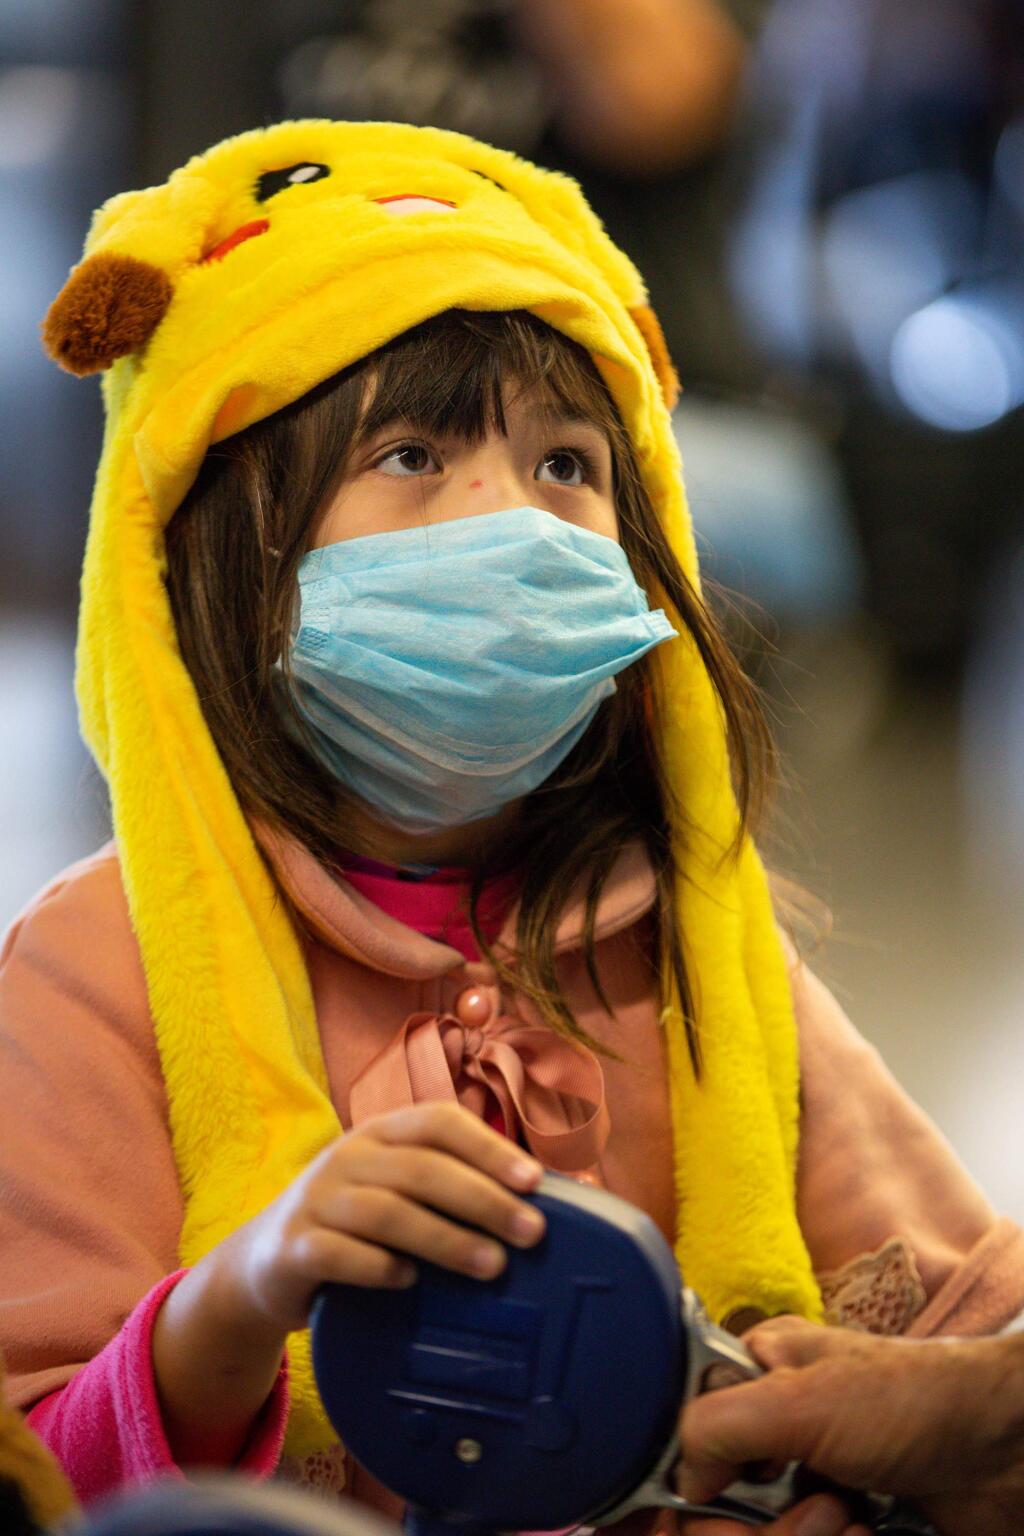 Daisy Johnston, 8, wears a face mask upon arriving to terminal G at San Francisco International Airport on Tuesday, Feb. 4, 2020. Daisy returned from China with her mother Amy Deng, who also wore a face mask because of the threat of the coronavirus. (Randy Vazquez/Bay Area News Group/TNS)